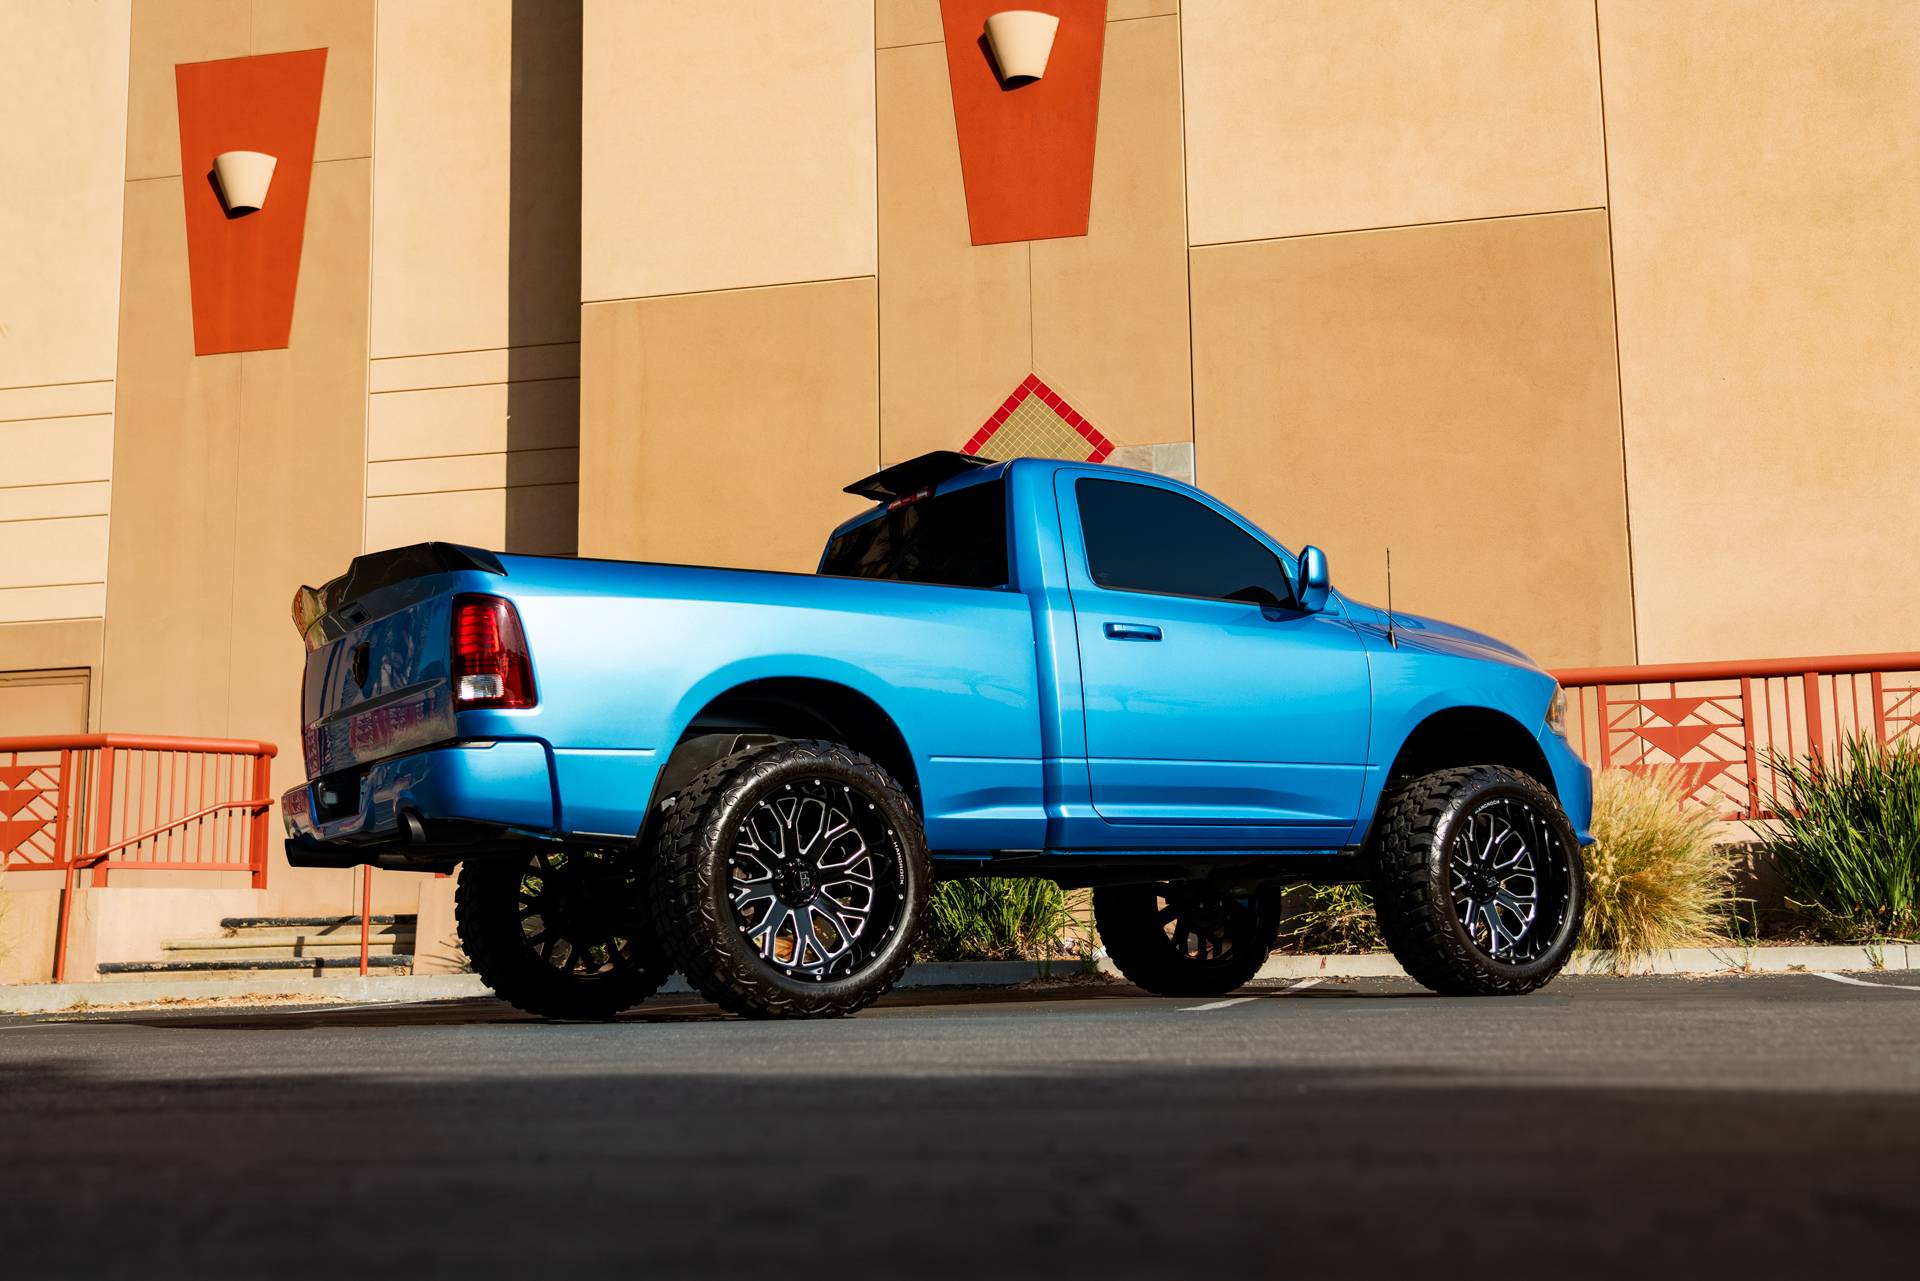 HardRock Offroad Aftermarket Offroad Wheels On a Lifted Dodge RAM 1500